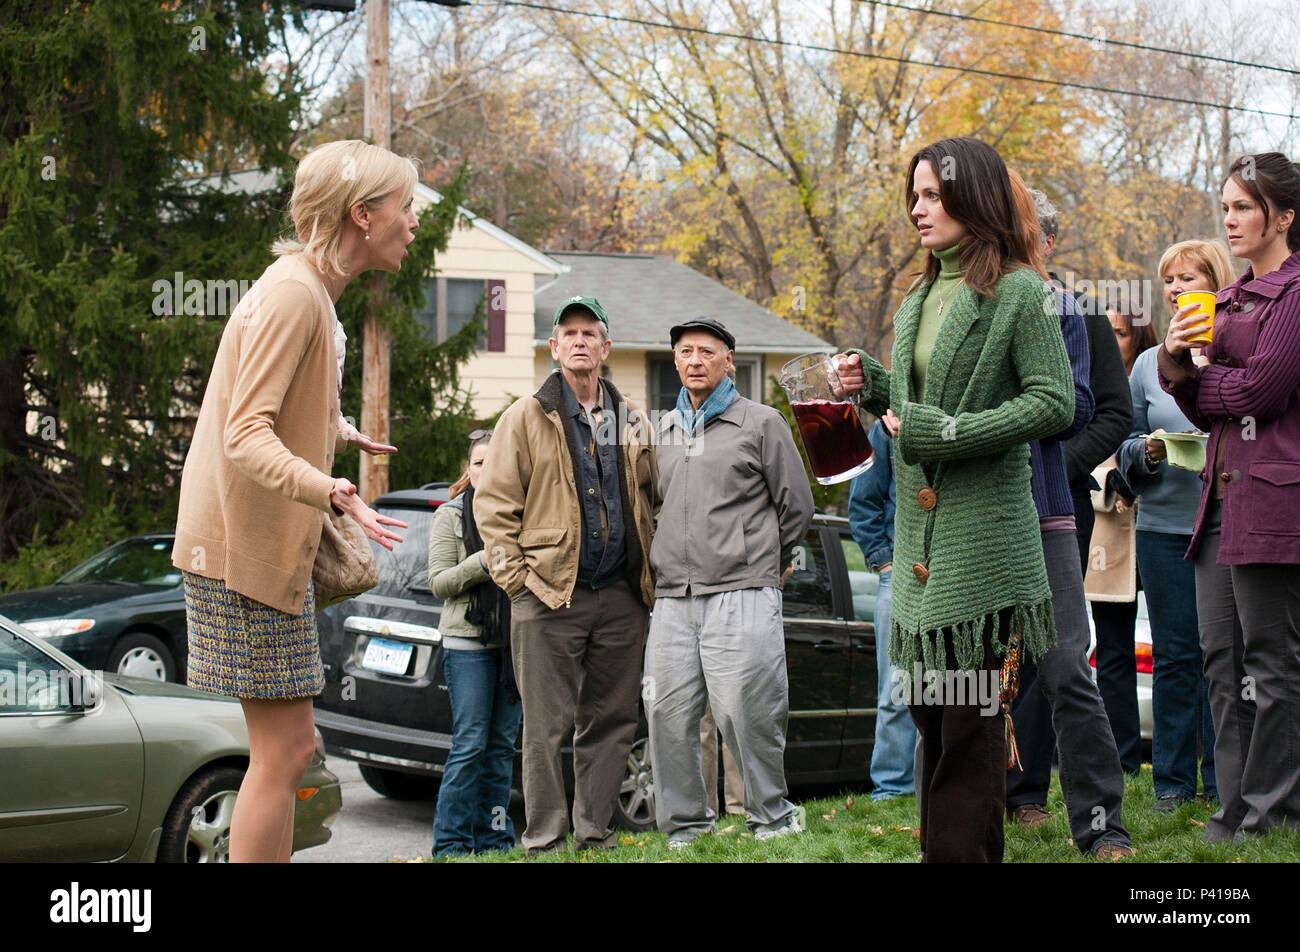 Original Film Title: YOUNG ADULT.  English Title: YOUNG ADULT.  Film Director: JASON REITMAN.  Year: 2011.  Stars: CHARLIZE THERON; ELIZABETH REASER. Credit: MANDATE PICTURES / Album Stock Photo